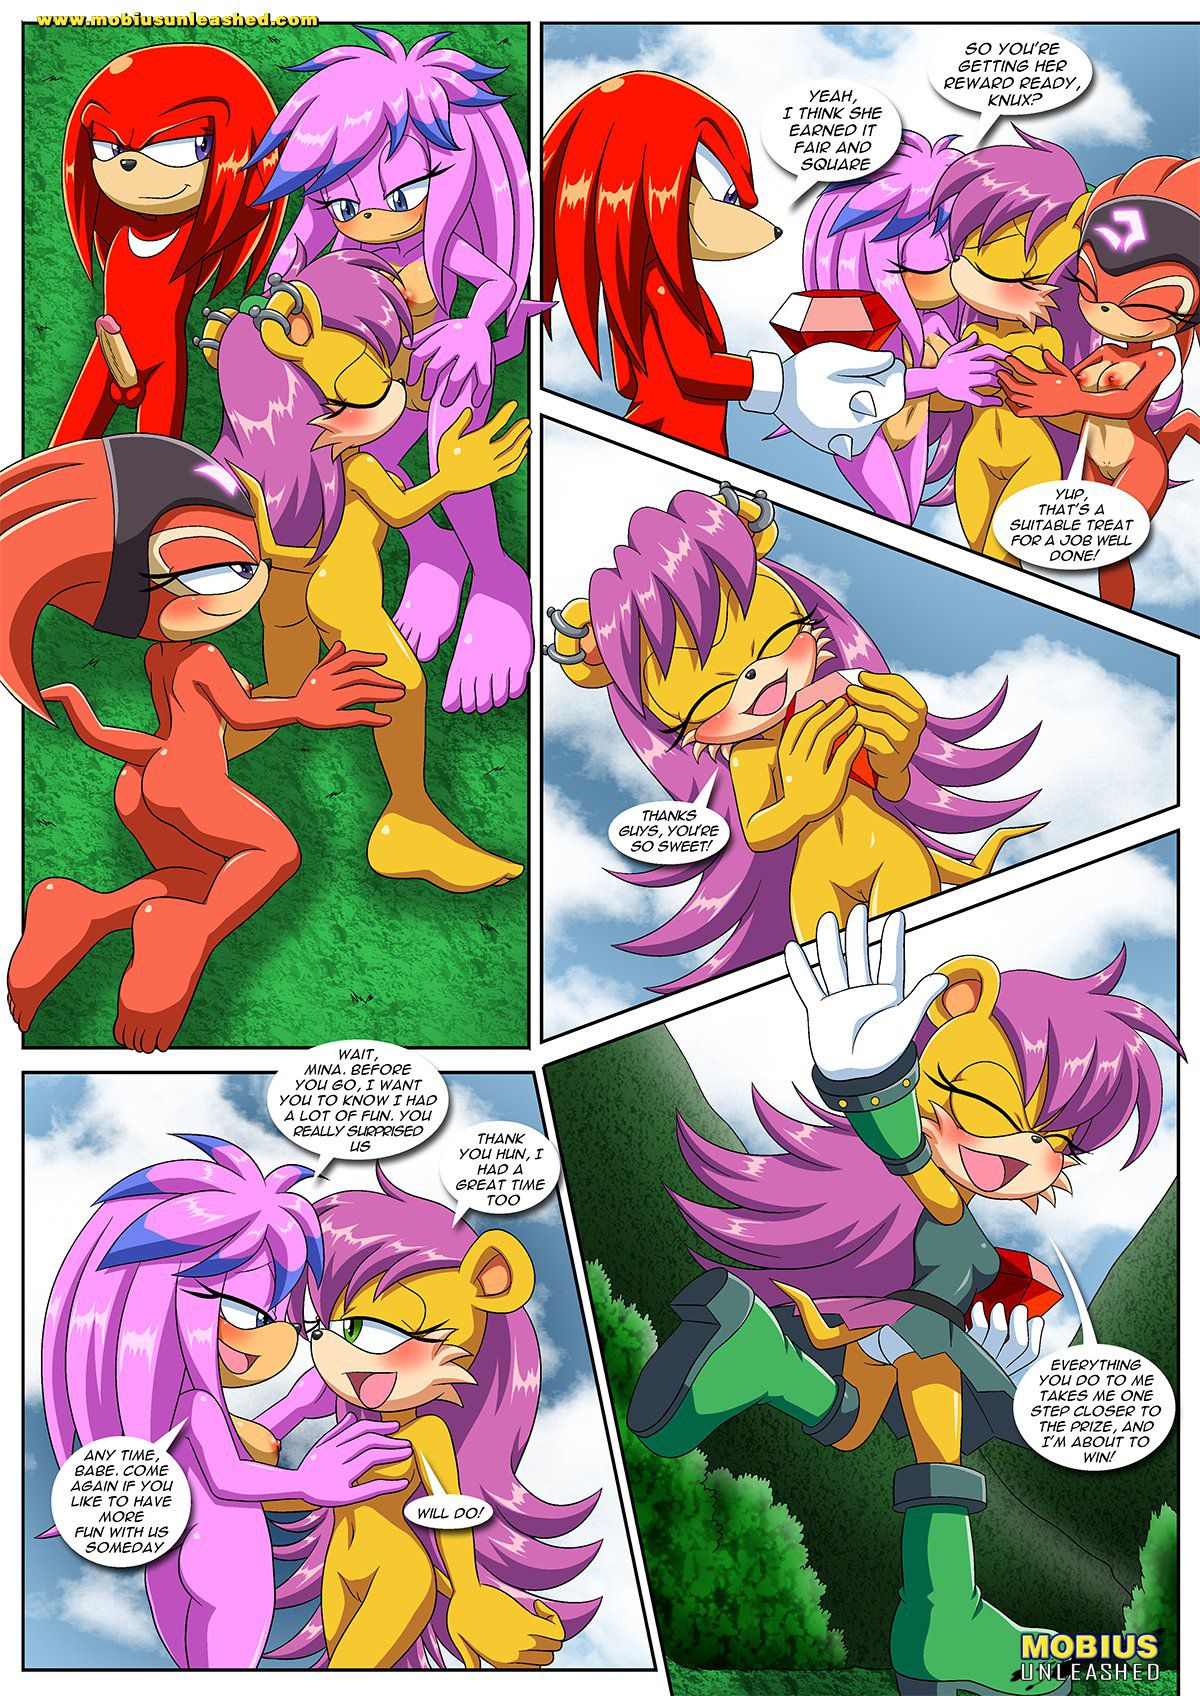 [Palcomix] Sonic Project XXX 4 (Sonic The Hedgehog) [Ongoing] 15